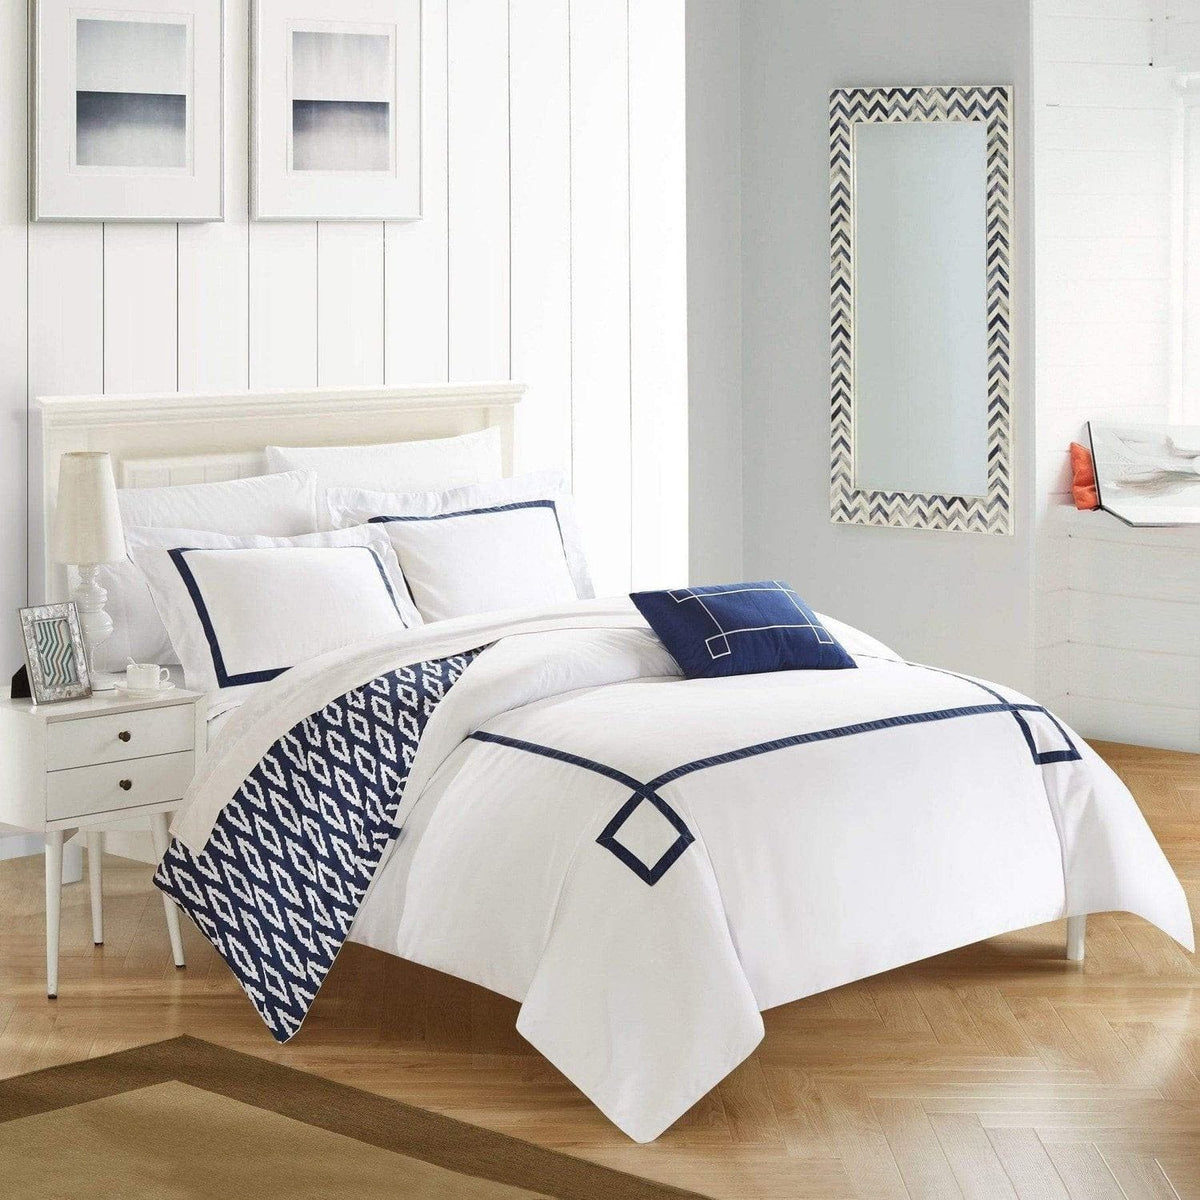 Chic Home Kendall 4 Piece Reversible Duvet Cover Set Navy